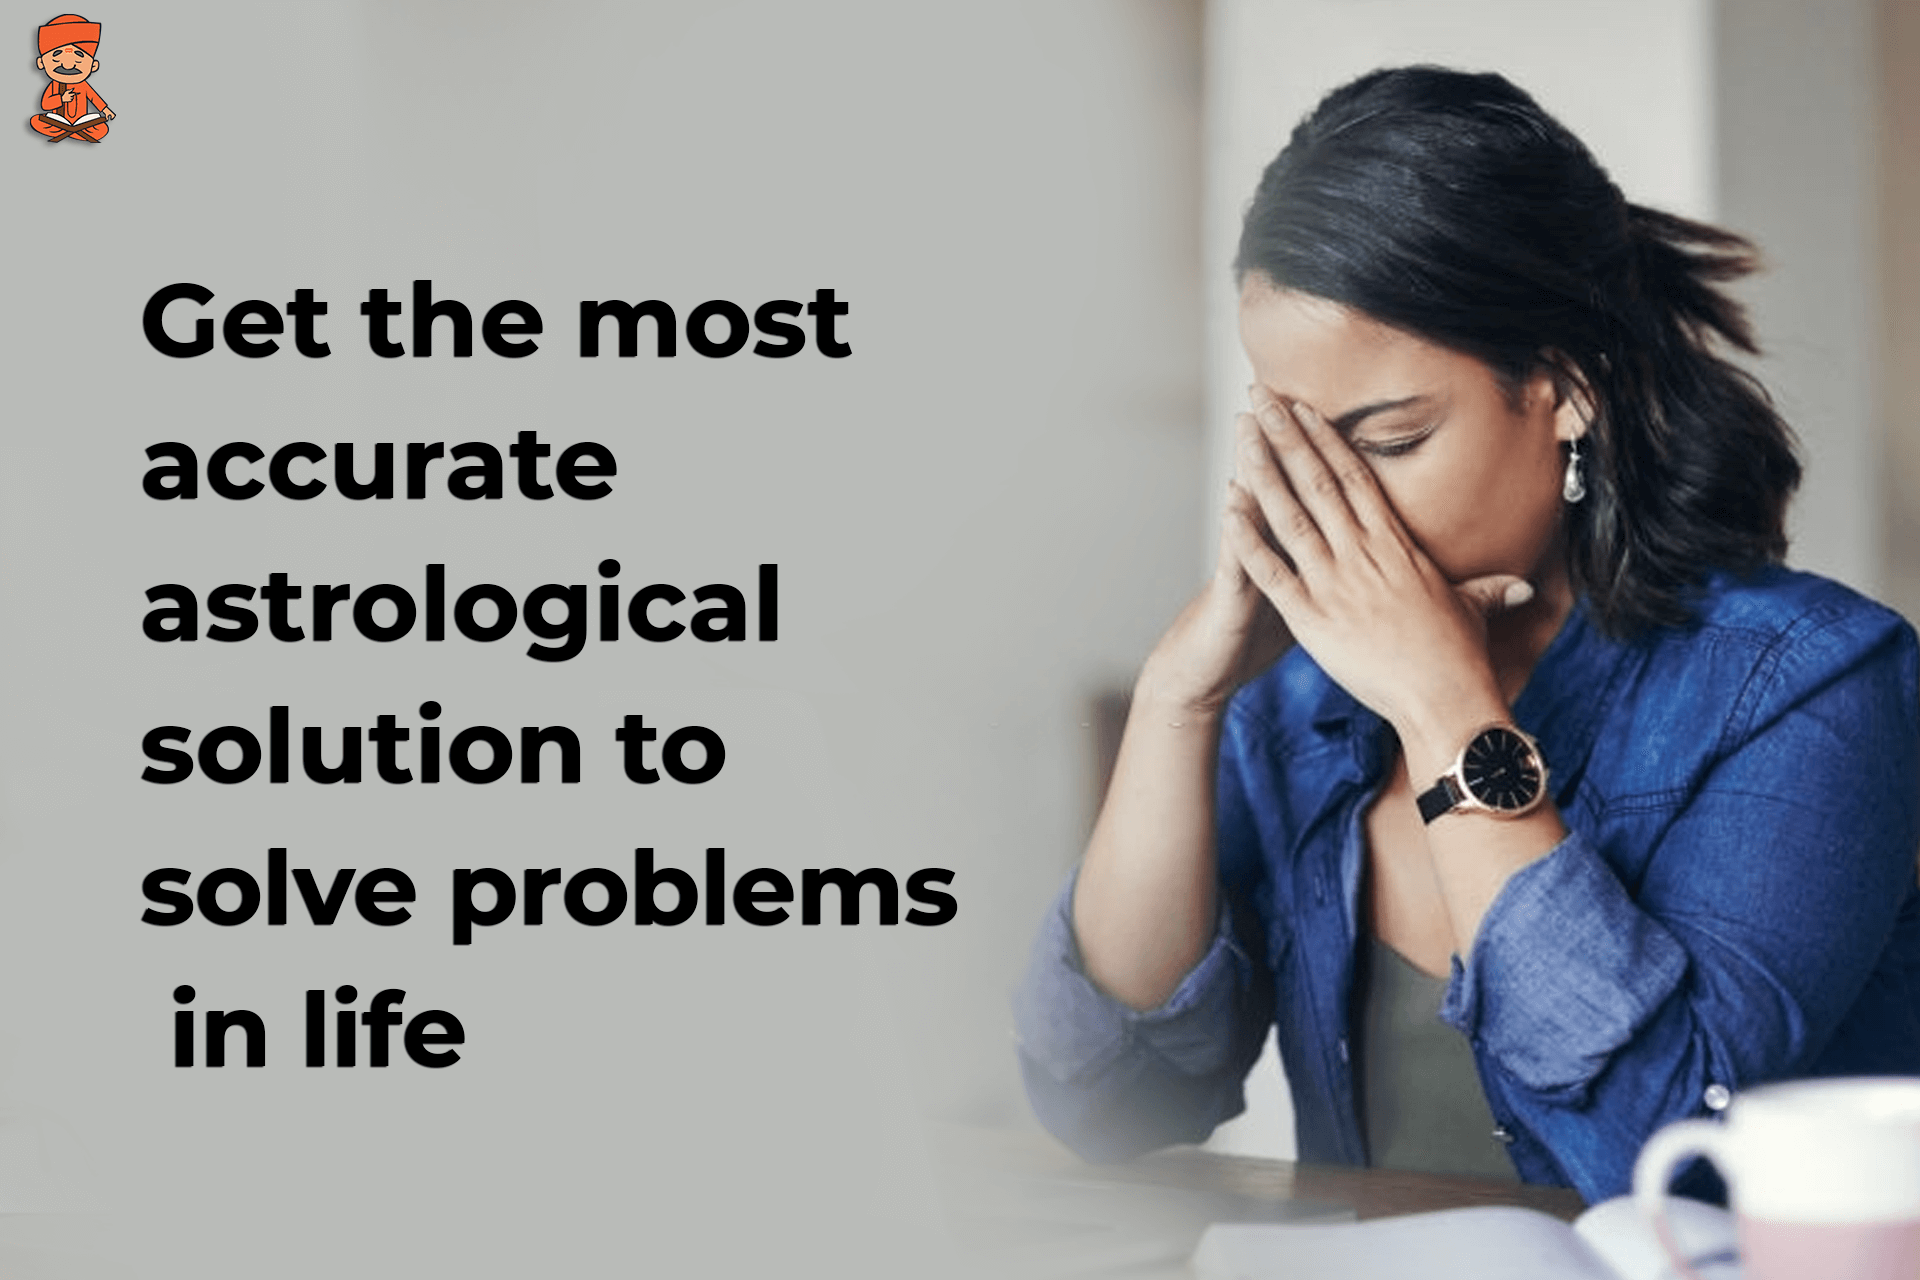 Get the Most Accurate Astrological Solution to Solve Problems in Life